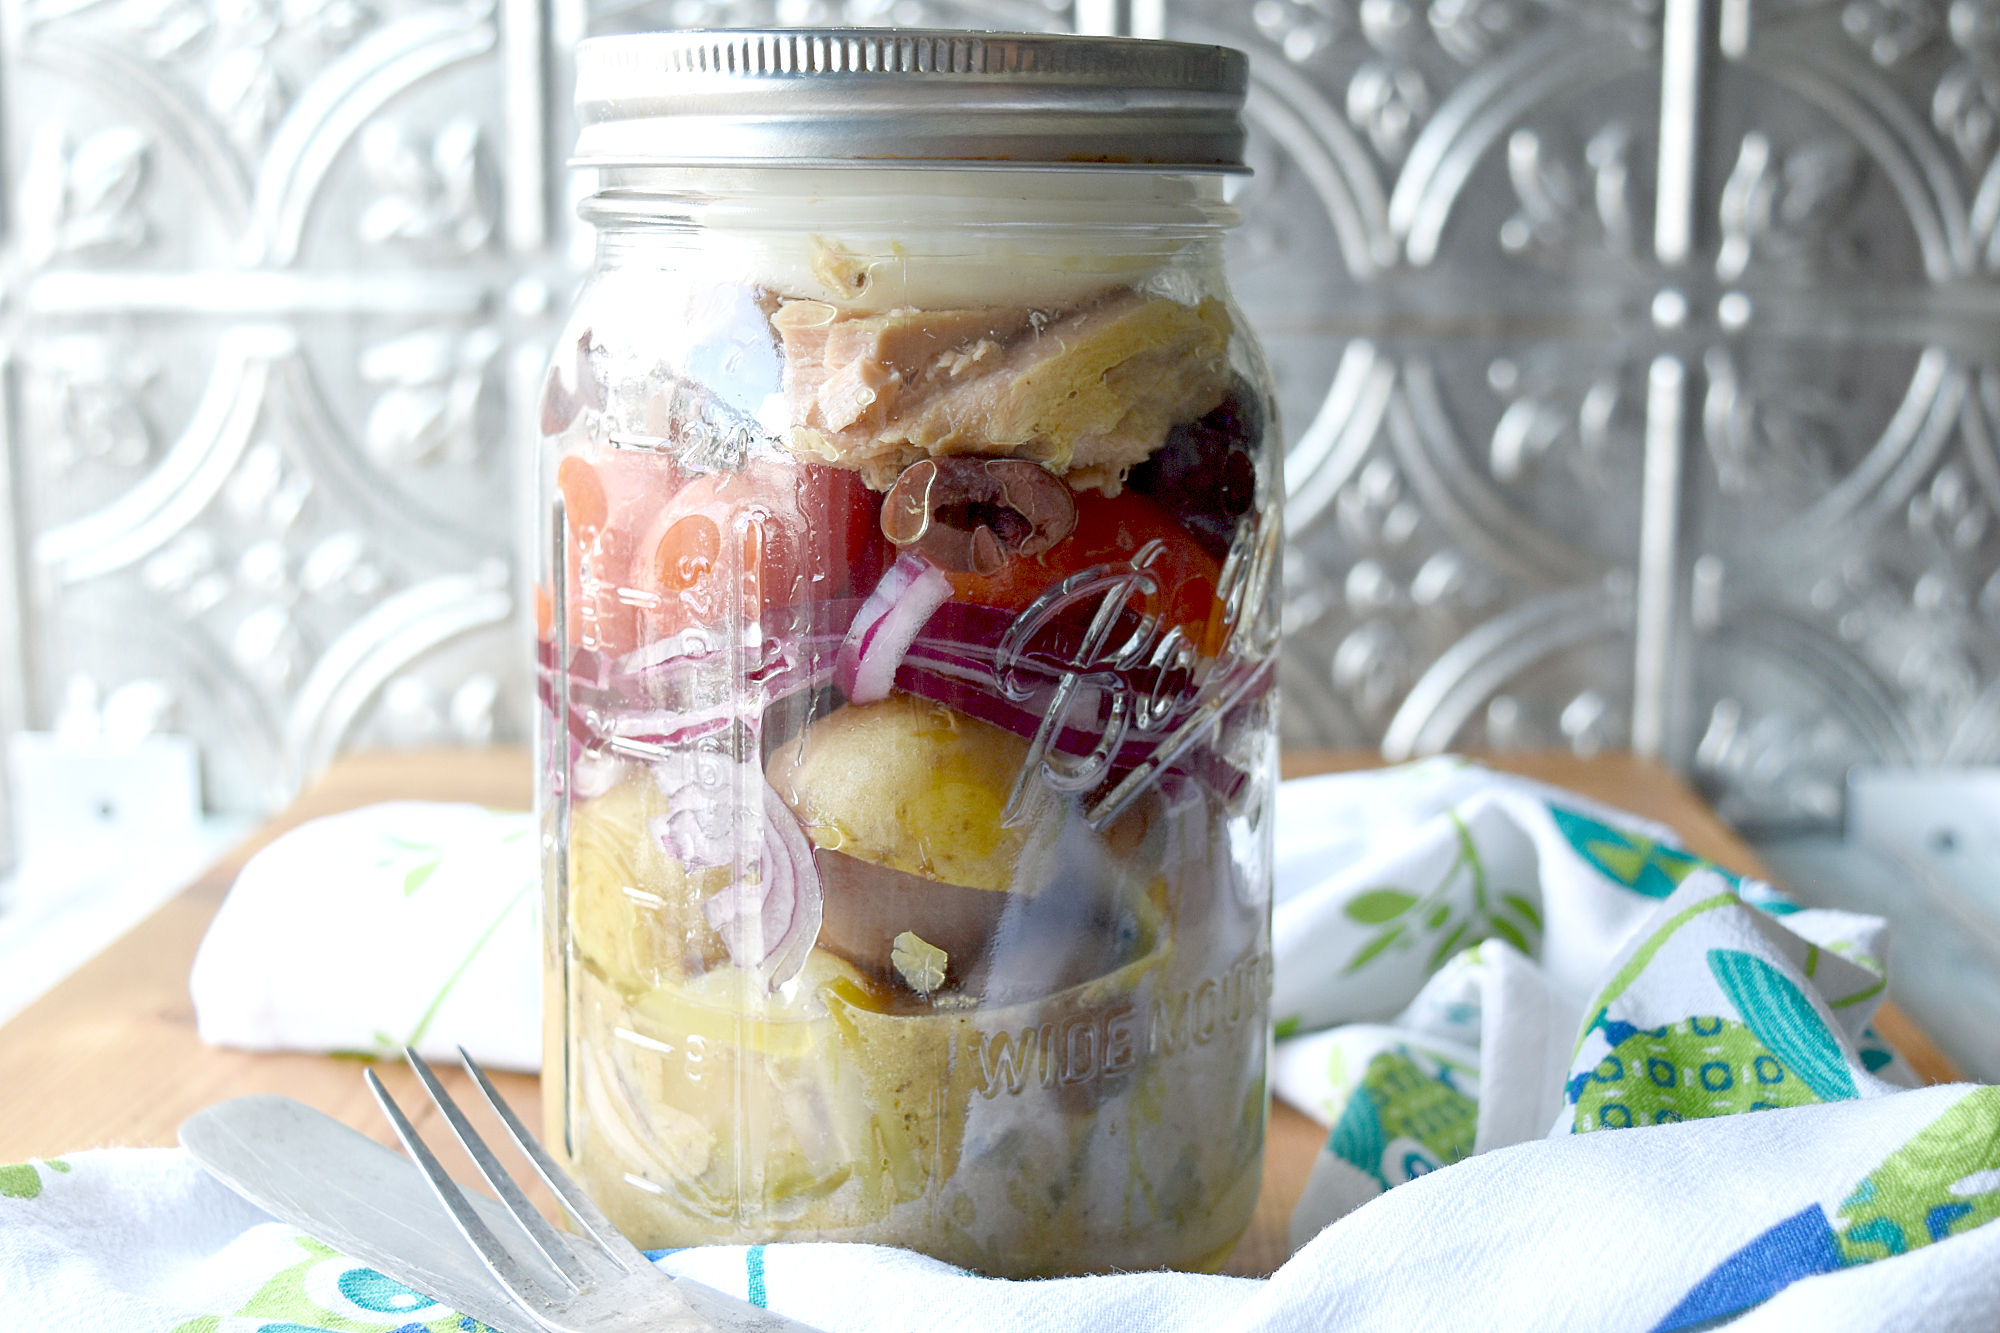 Layered Mason Jar Niçoise Salad is perfect for a hearty and delicious office lunch.  Or make several for a fun lunch in the park. #OurFamilyTable